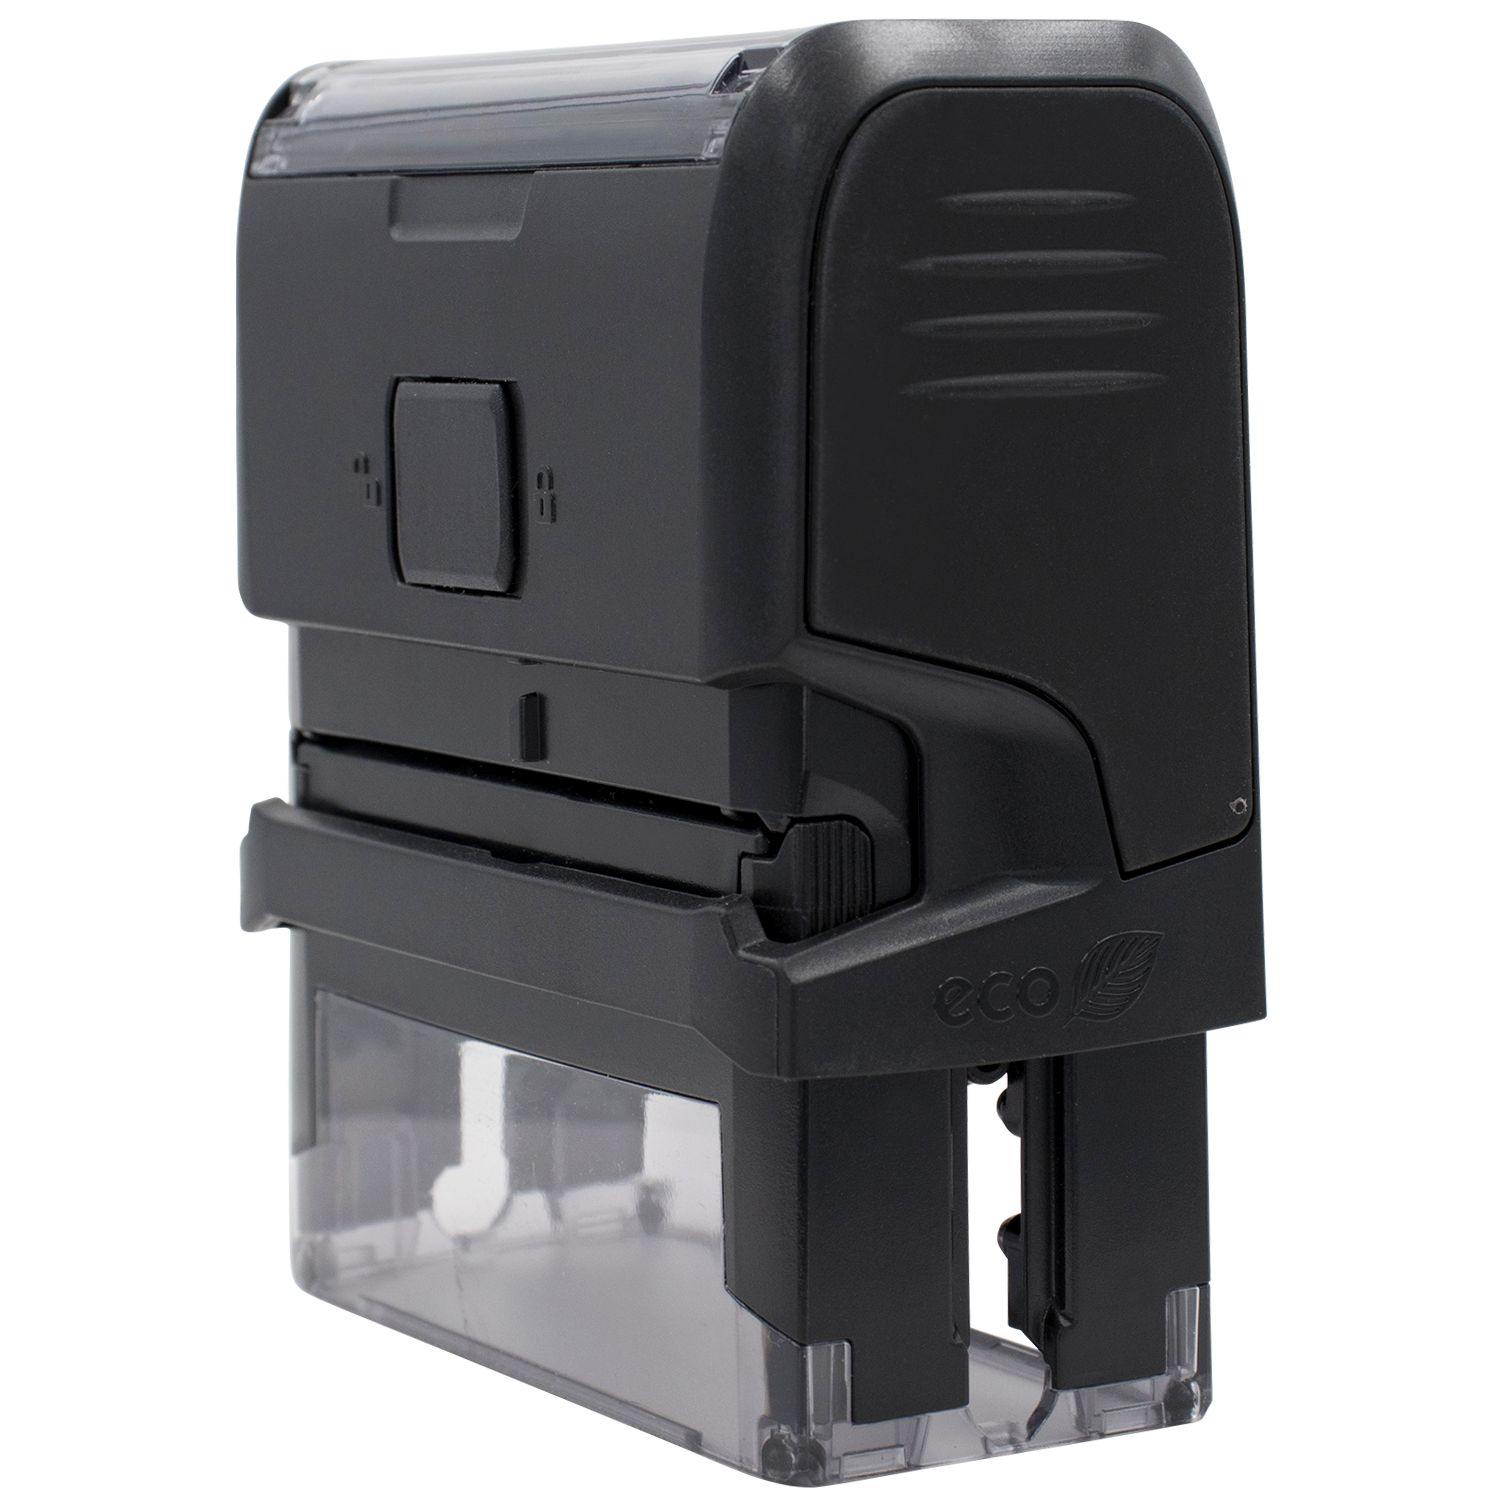 Large Self-Inking Immunocompromised Stamp - Engineer Seal Stamps - Brand_Trodat, Impression Size_Large, Stamp Type_Self-Inking Stamp, Type of Use_Medical Office